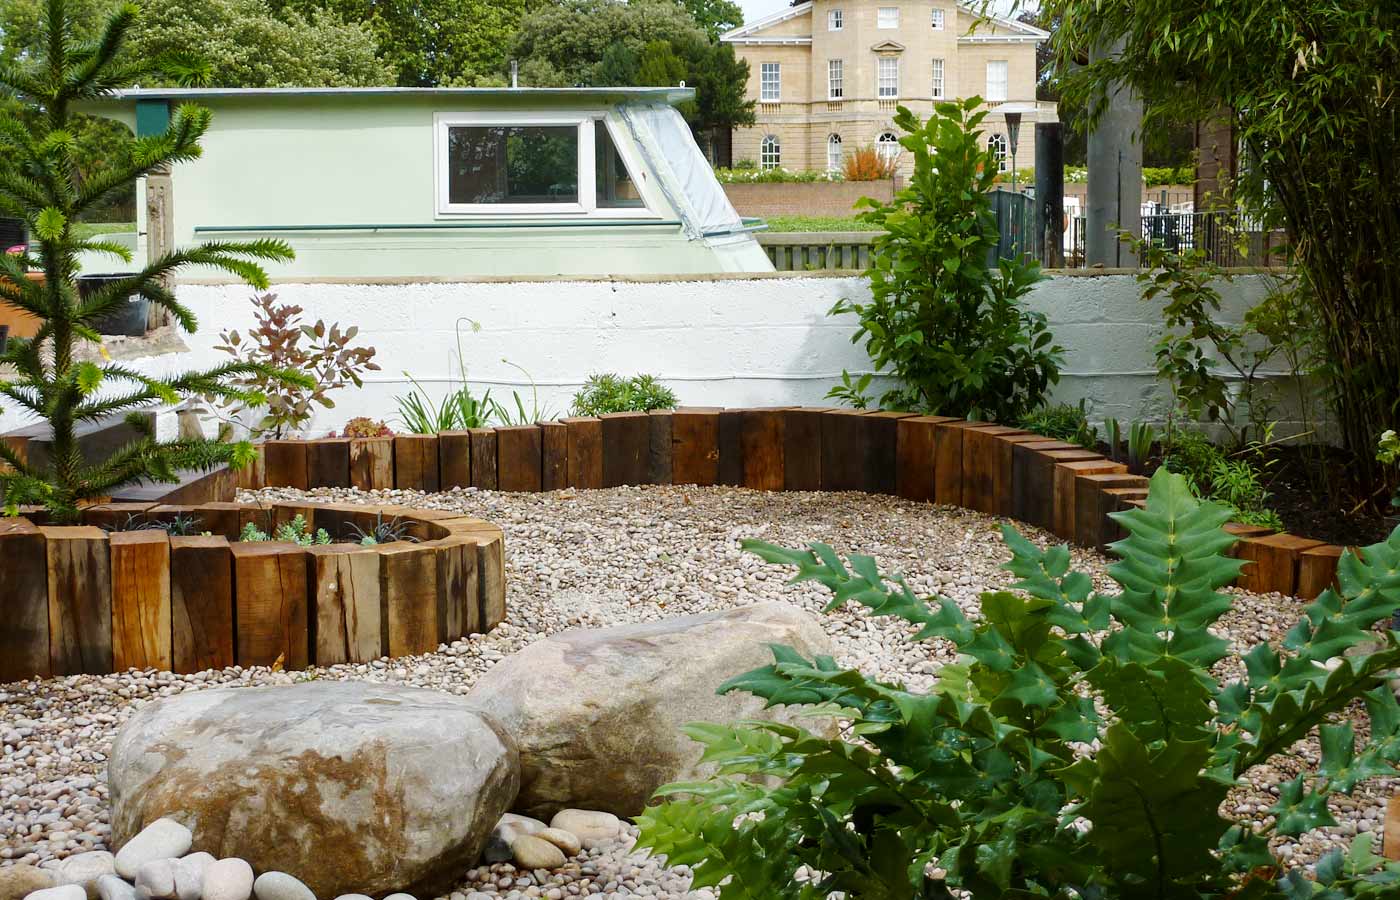 Garden for houseboat on the Thames in Richmond, West London